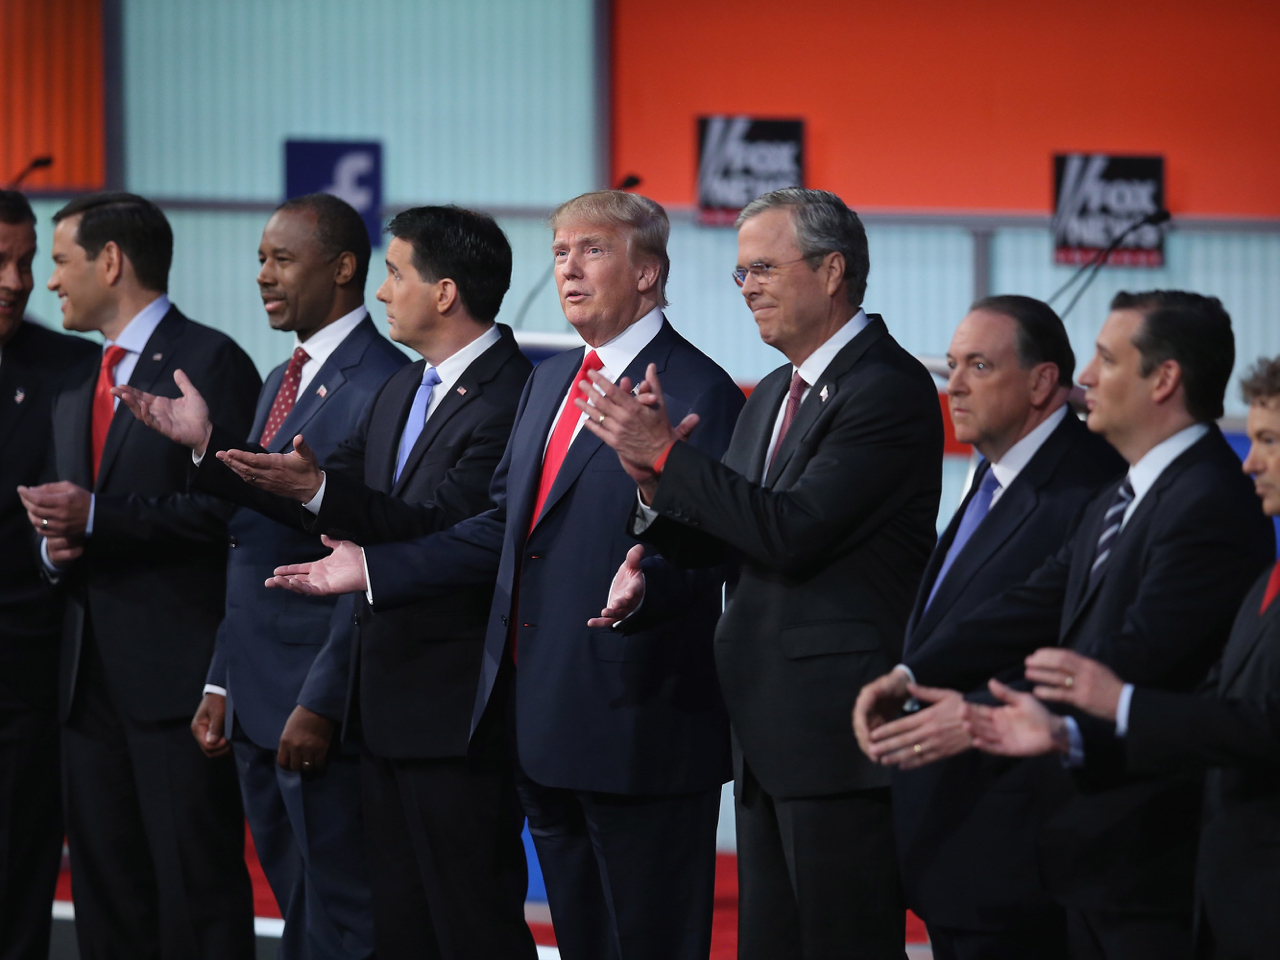 How The Republican Field Dwindled From 17 To Donald Trump